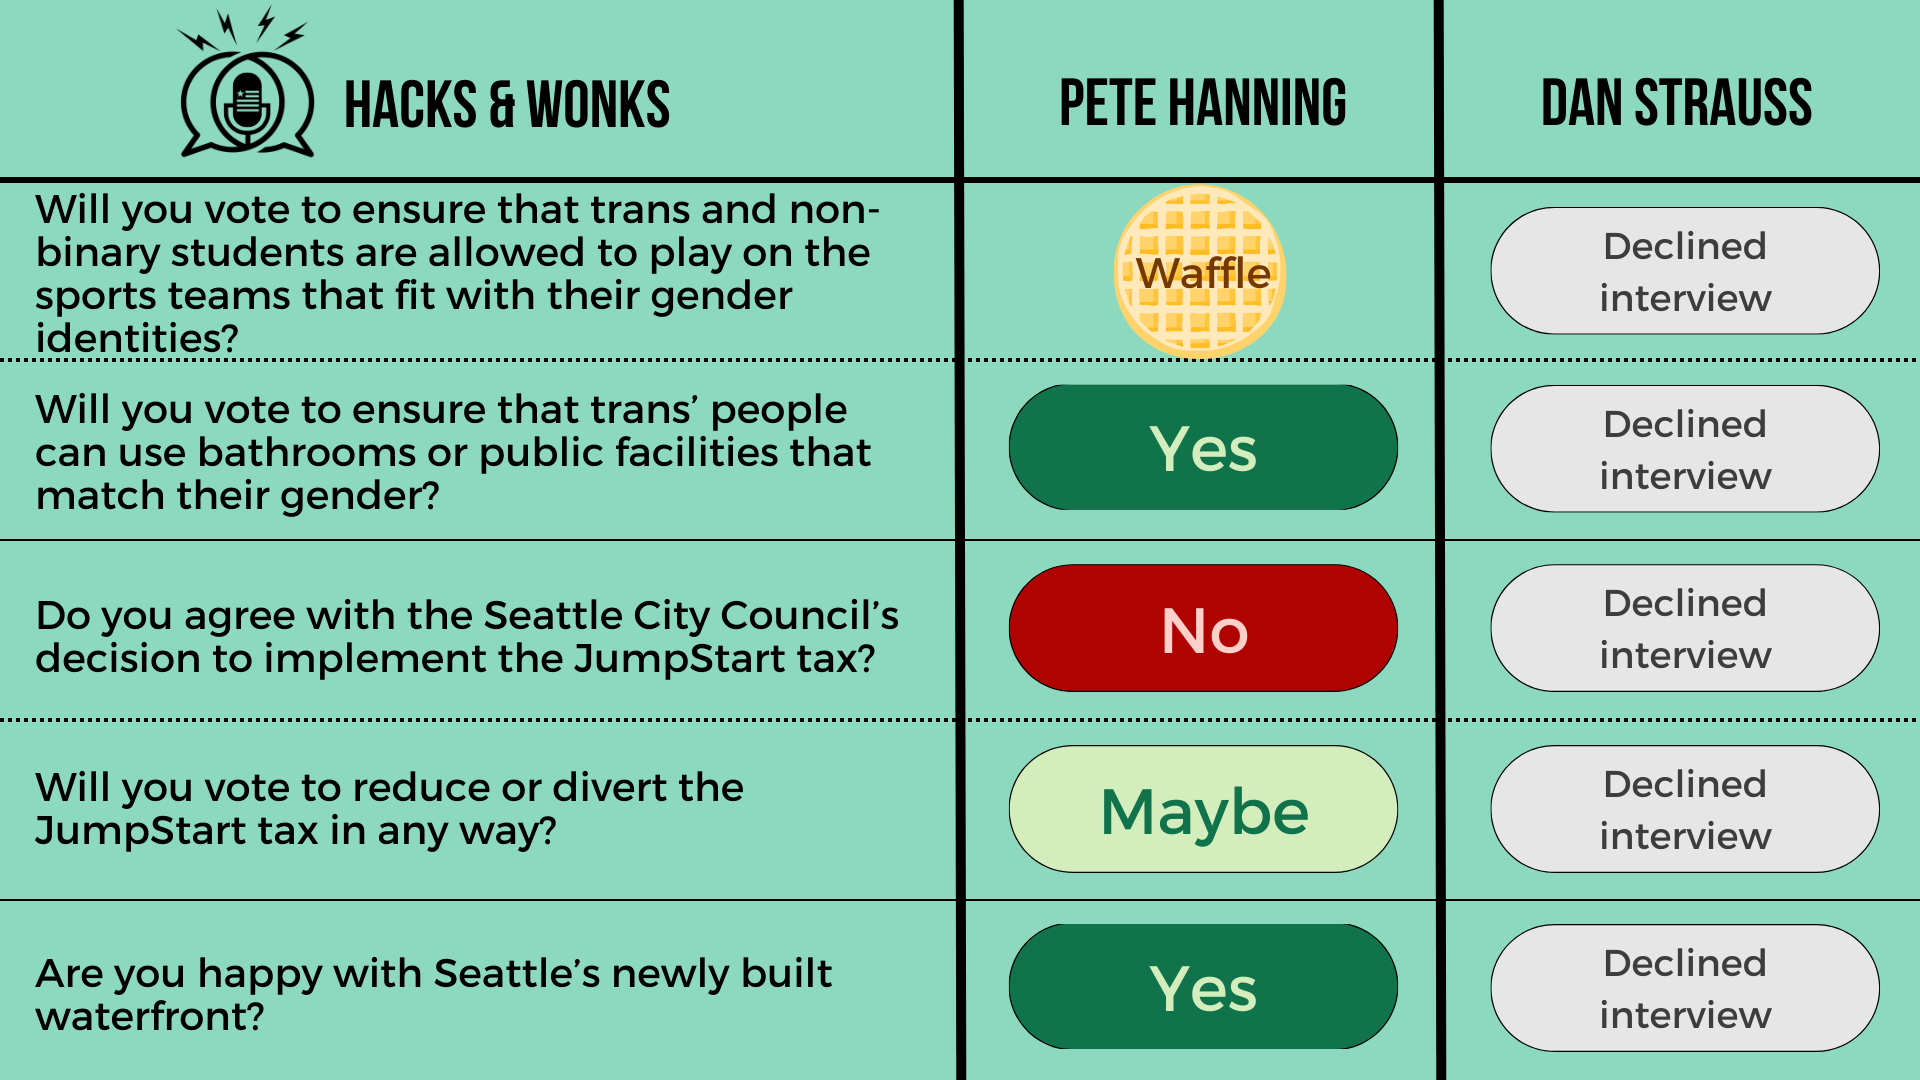 Q: Will you vote to ensure that trans and non-binary students are allowed to play on the sports teams that fit with their gender identities? Pete Hanning: Waffle, Dan Strauss: Declined interview  Q: Will you vote to ensure that trans’ people can use